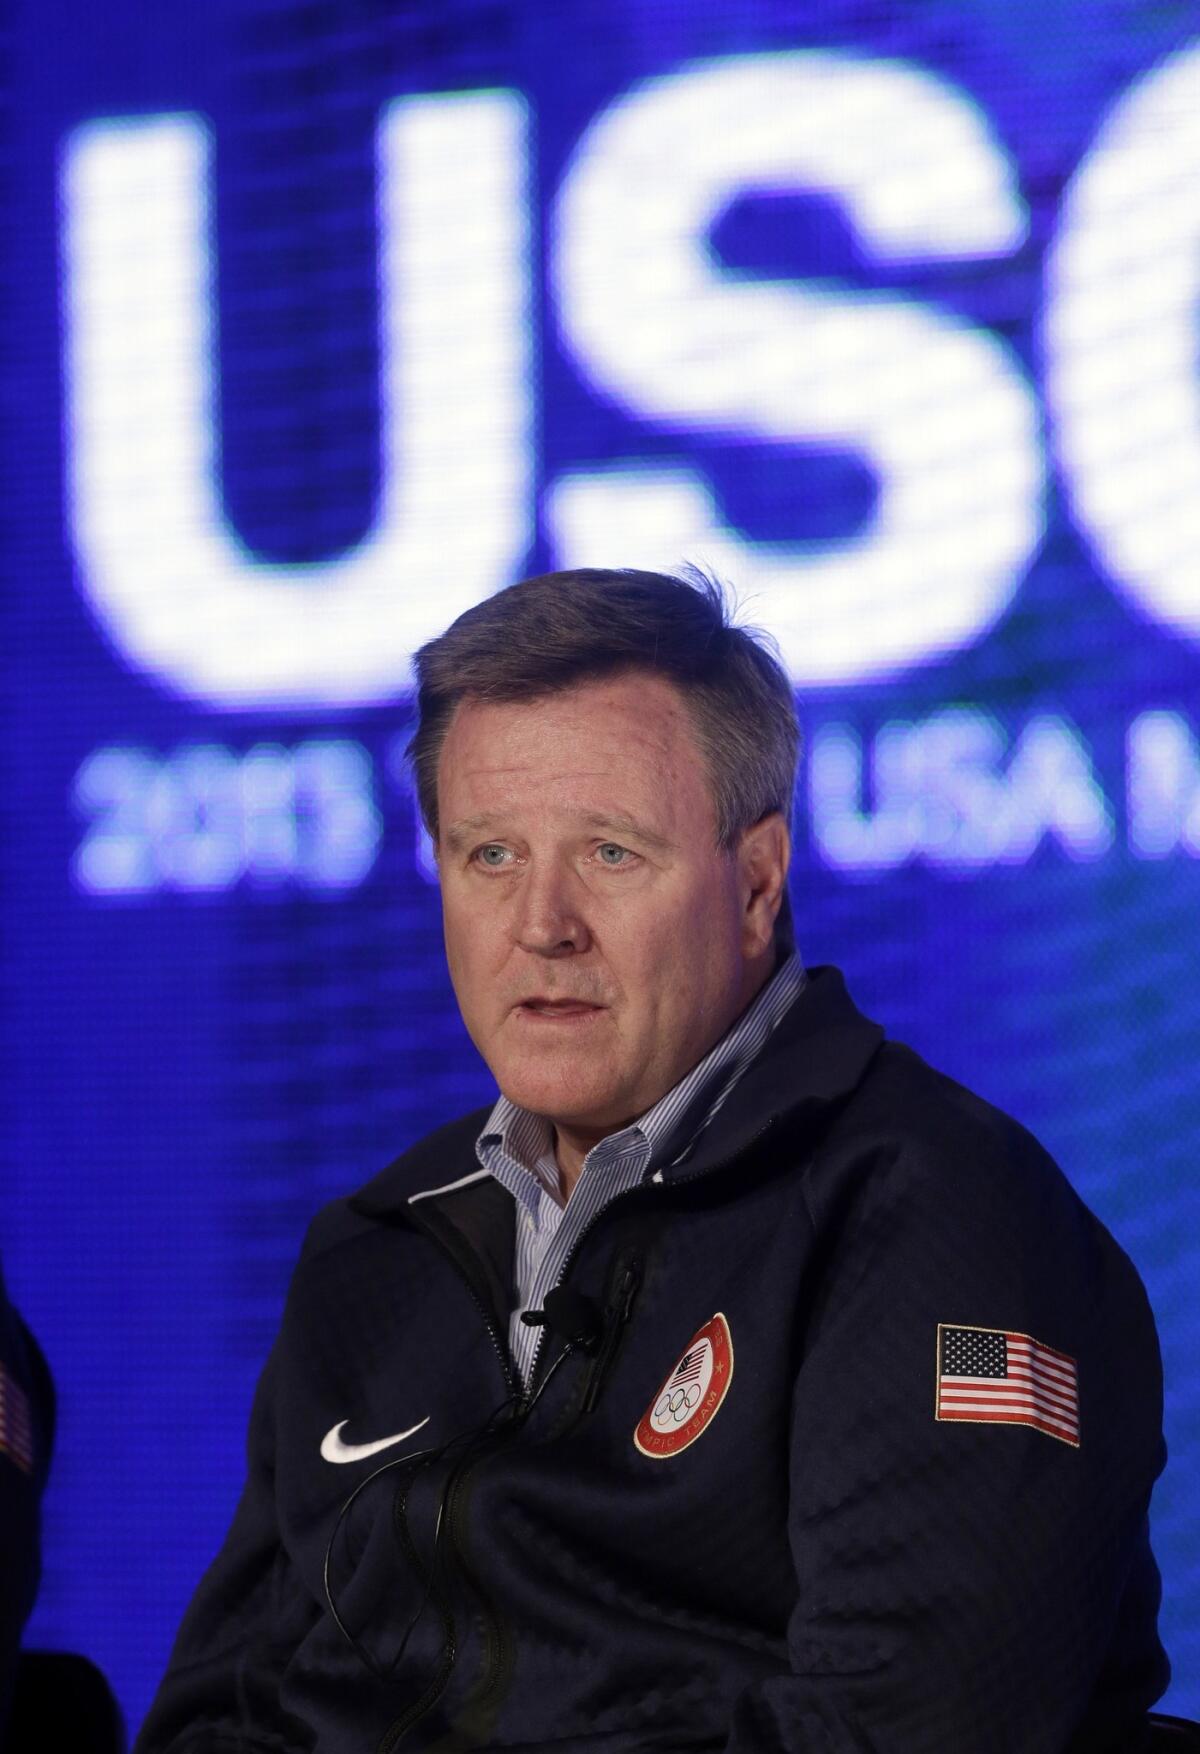 U.S. Olympic Committee chief Scott Blackmun opposes a boycott of the 2014 Sochi Winter Olympic Games.